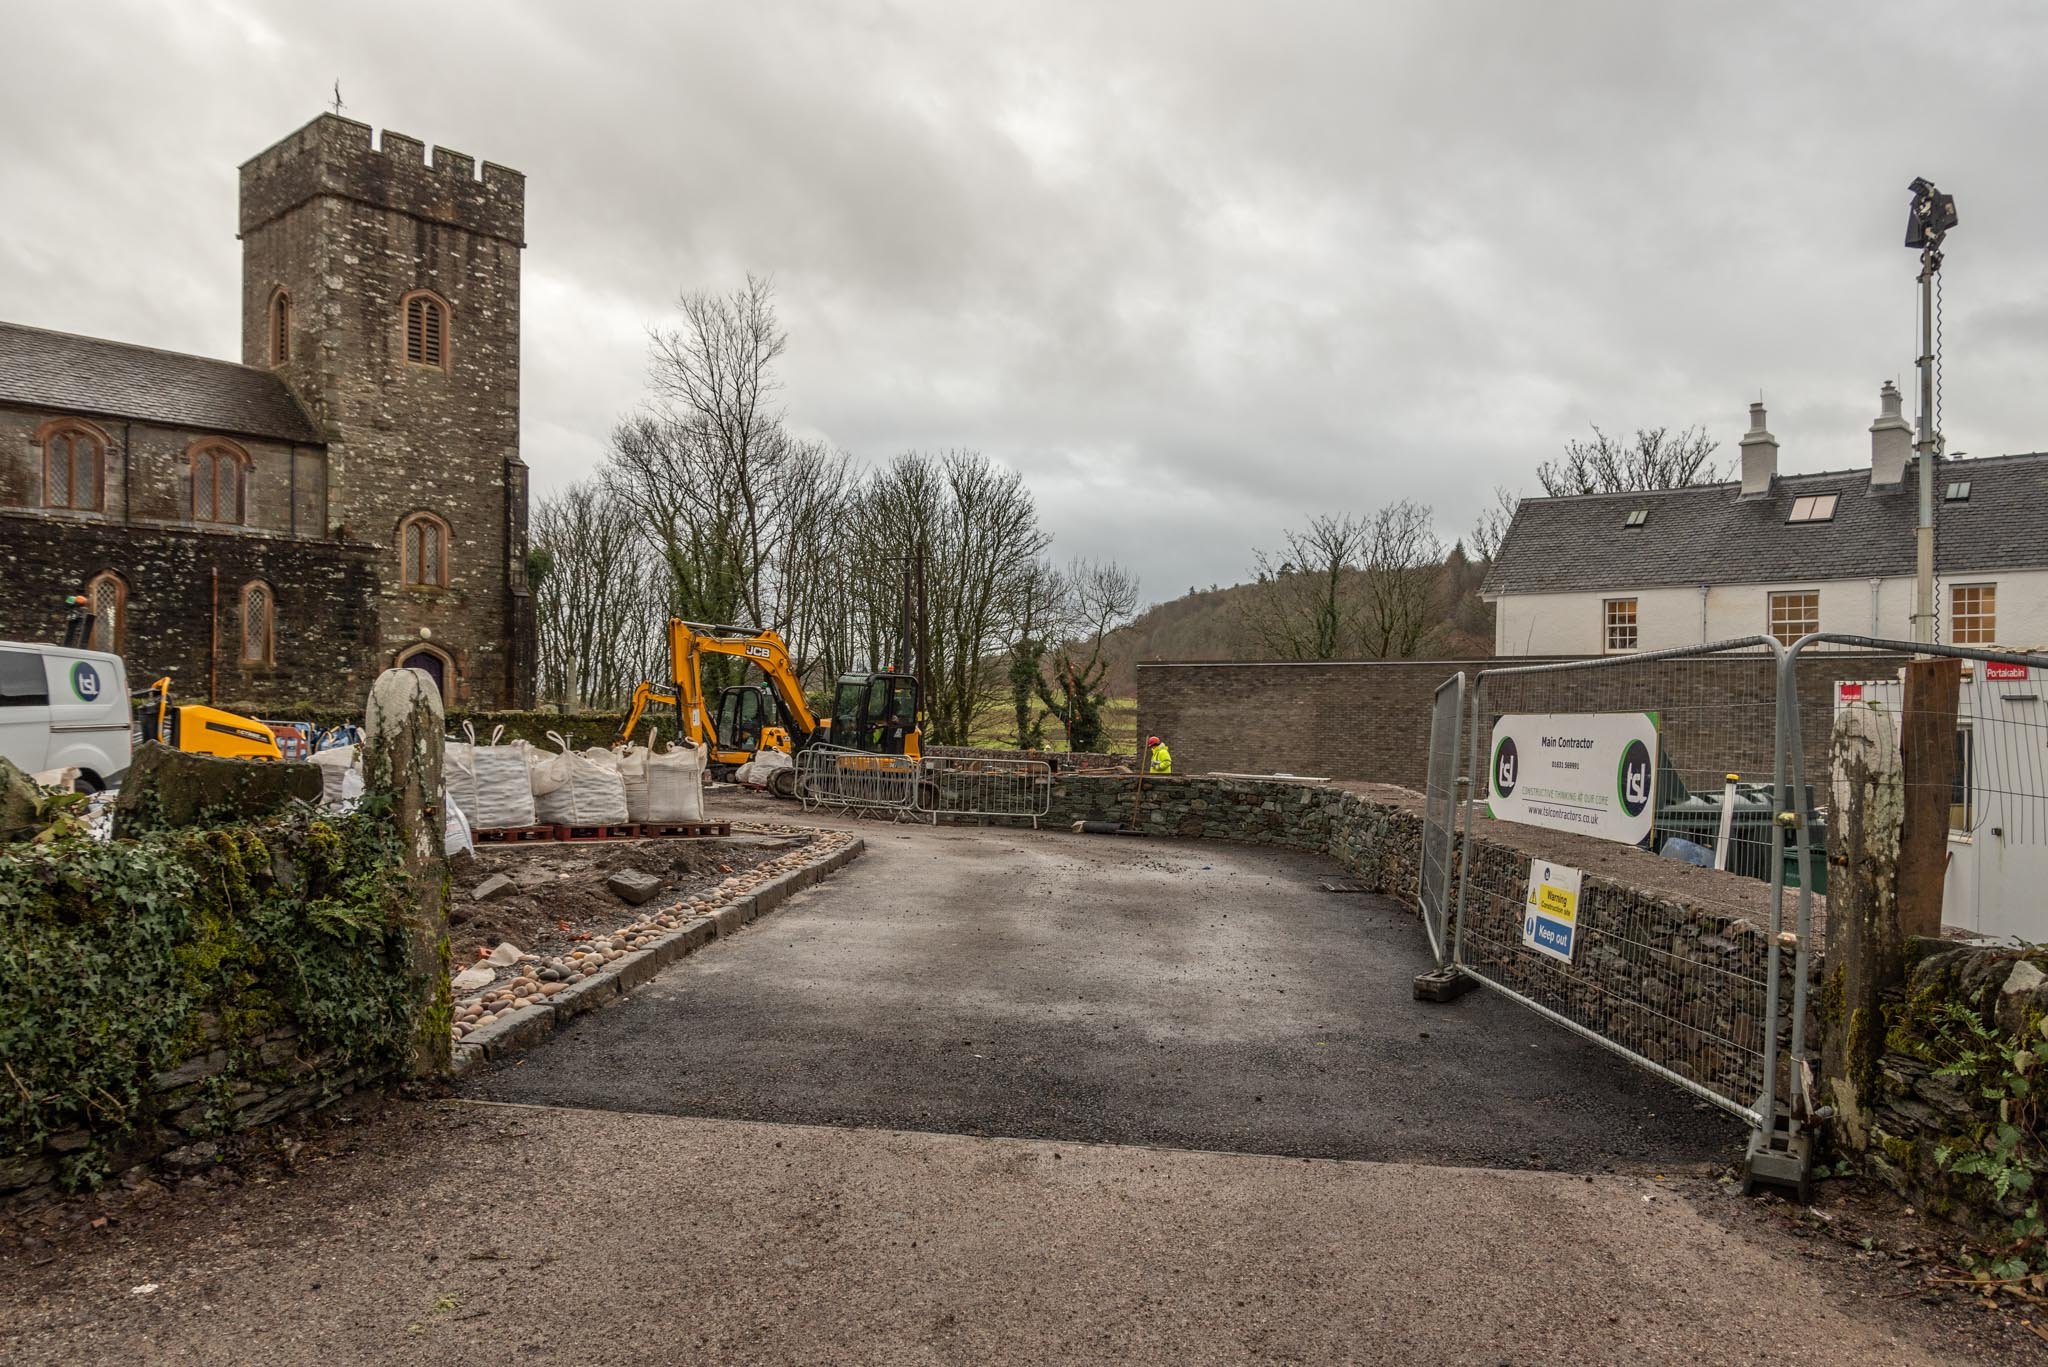  Construction of the new vehicle entrance, giving access to a revamped and resurfaced car park. 